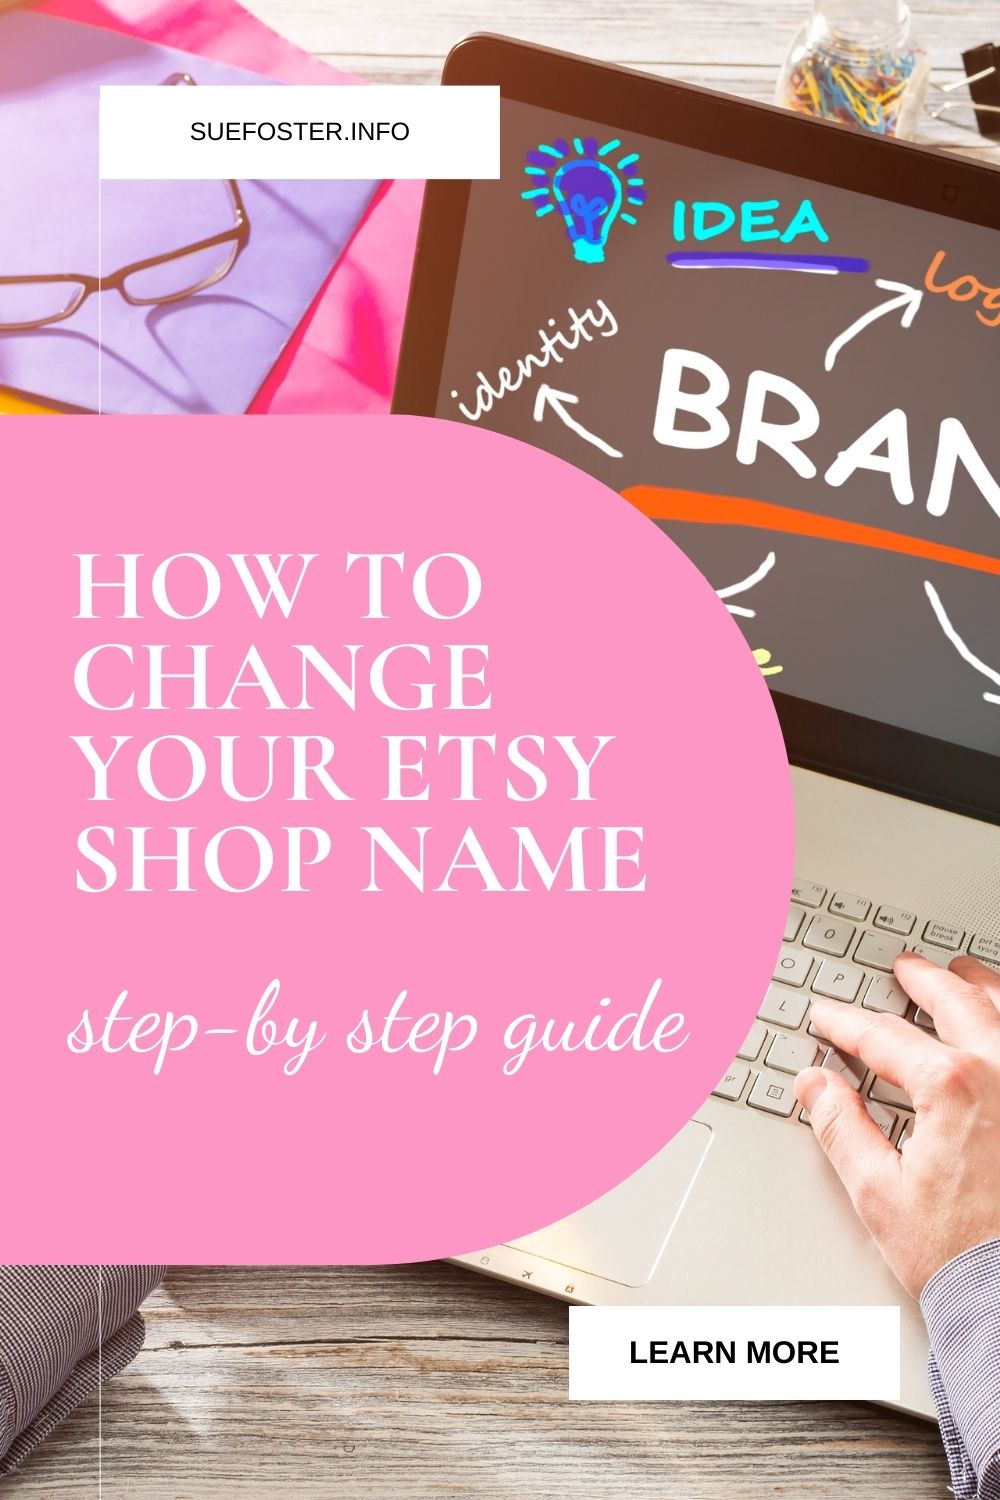 This is a quick guide on how to change your Etsy shop name. It's easy to do and I've included step-by-step instructions.